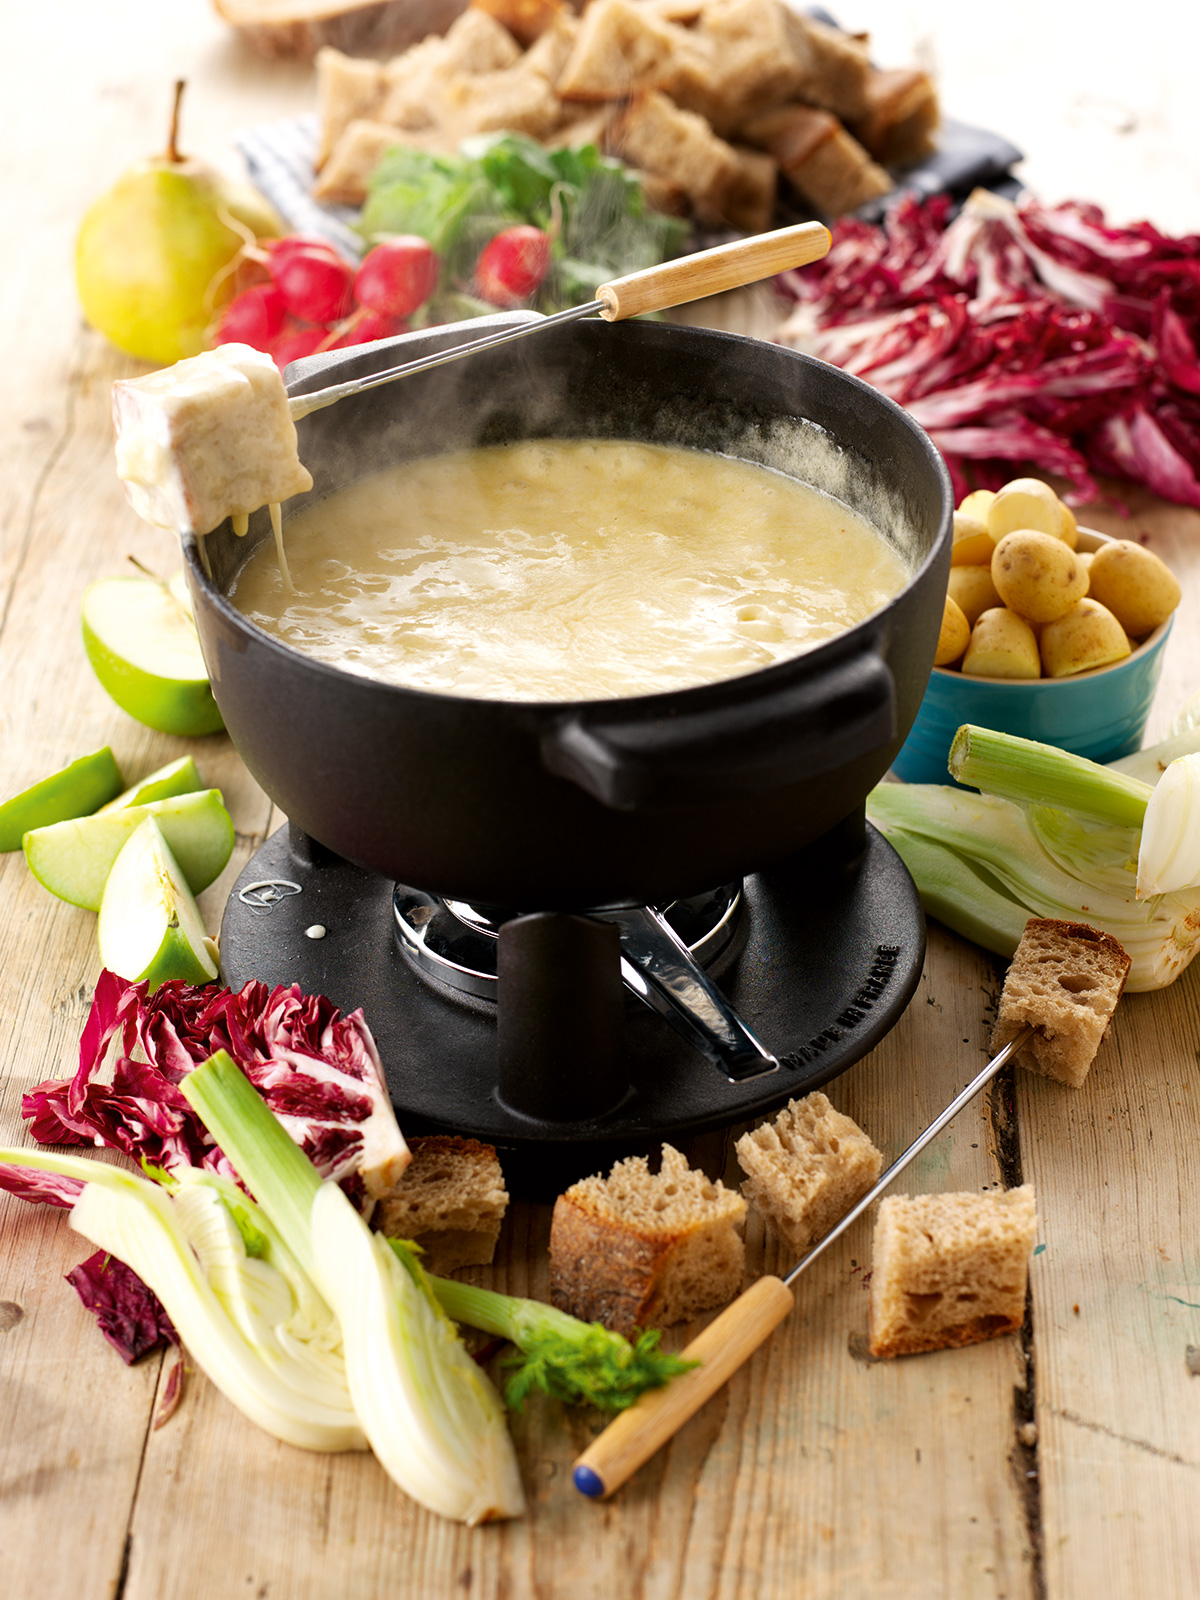 What are some easy fondue recipes?